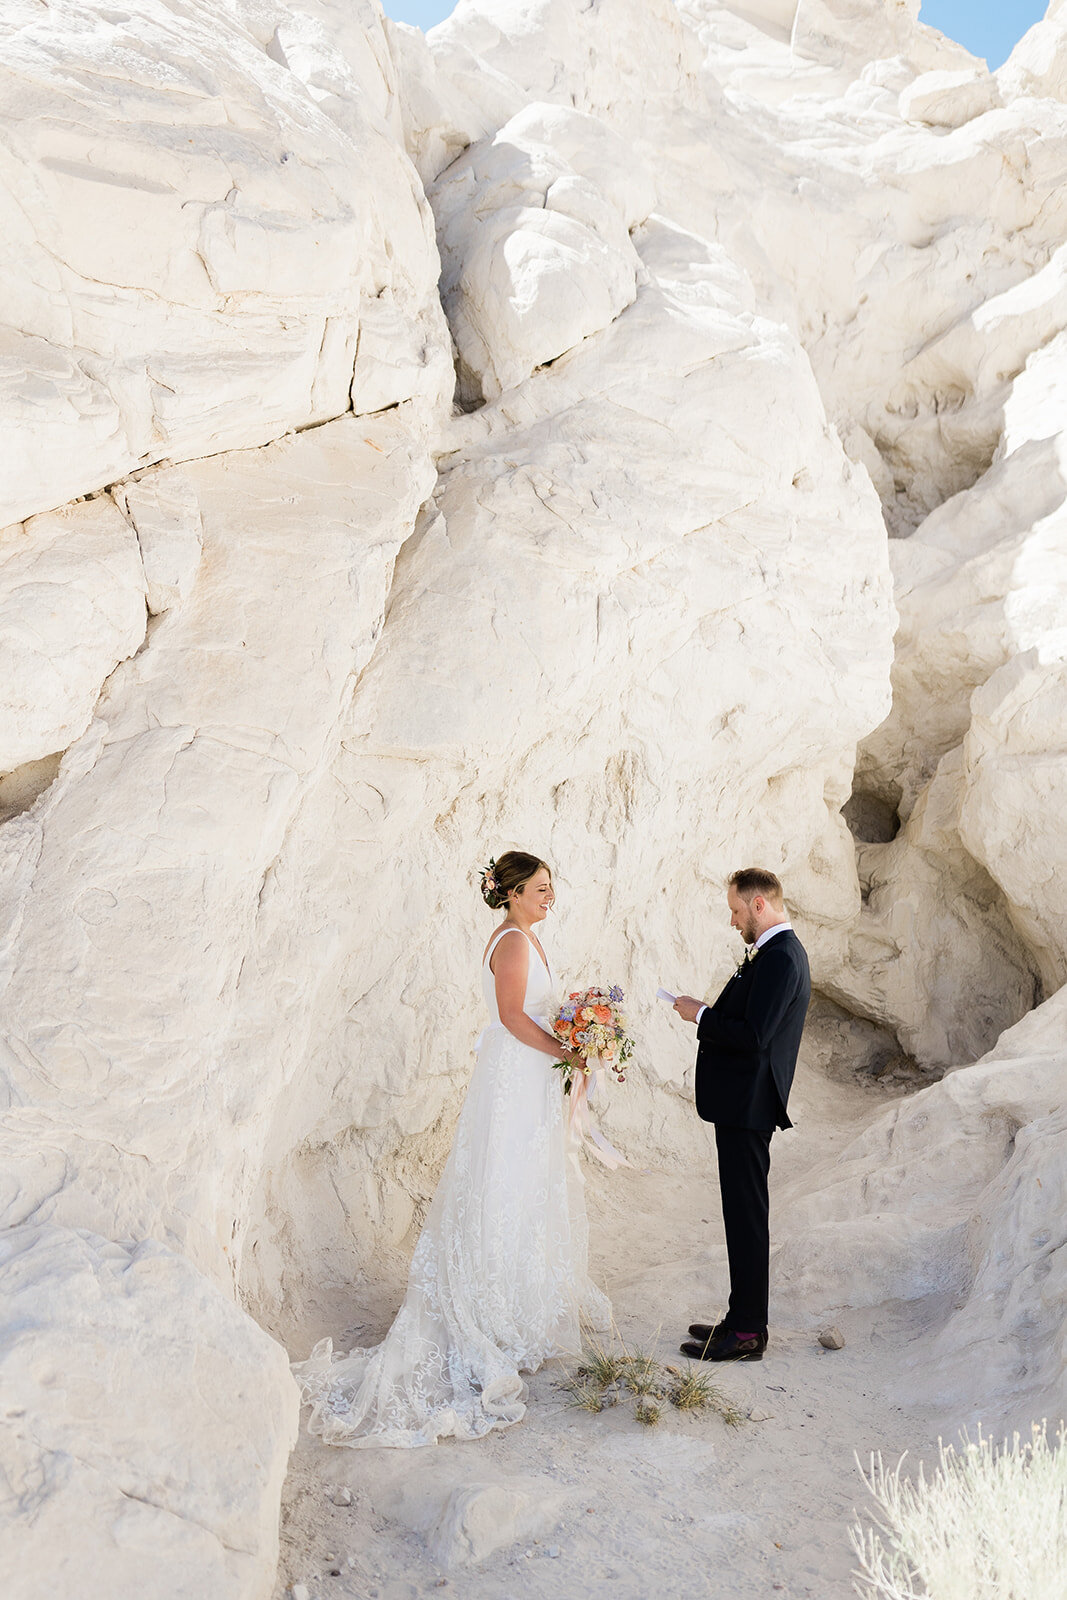 Elopement photographer for New Mexico's scenic destinations